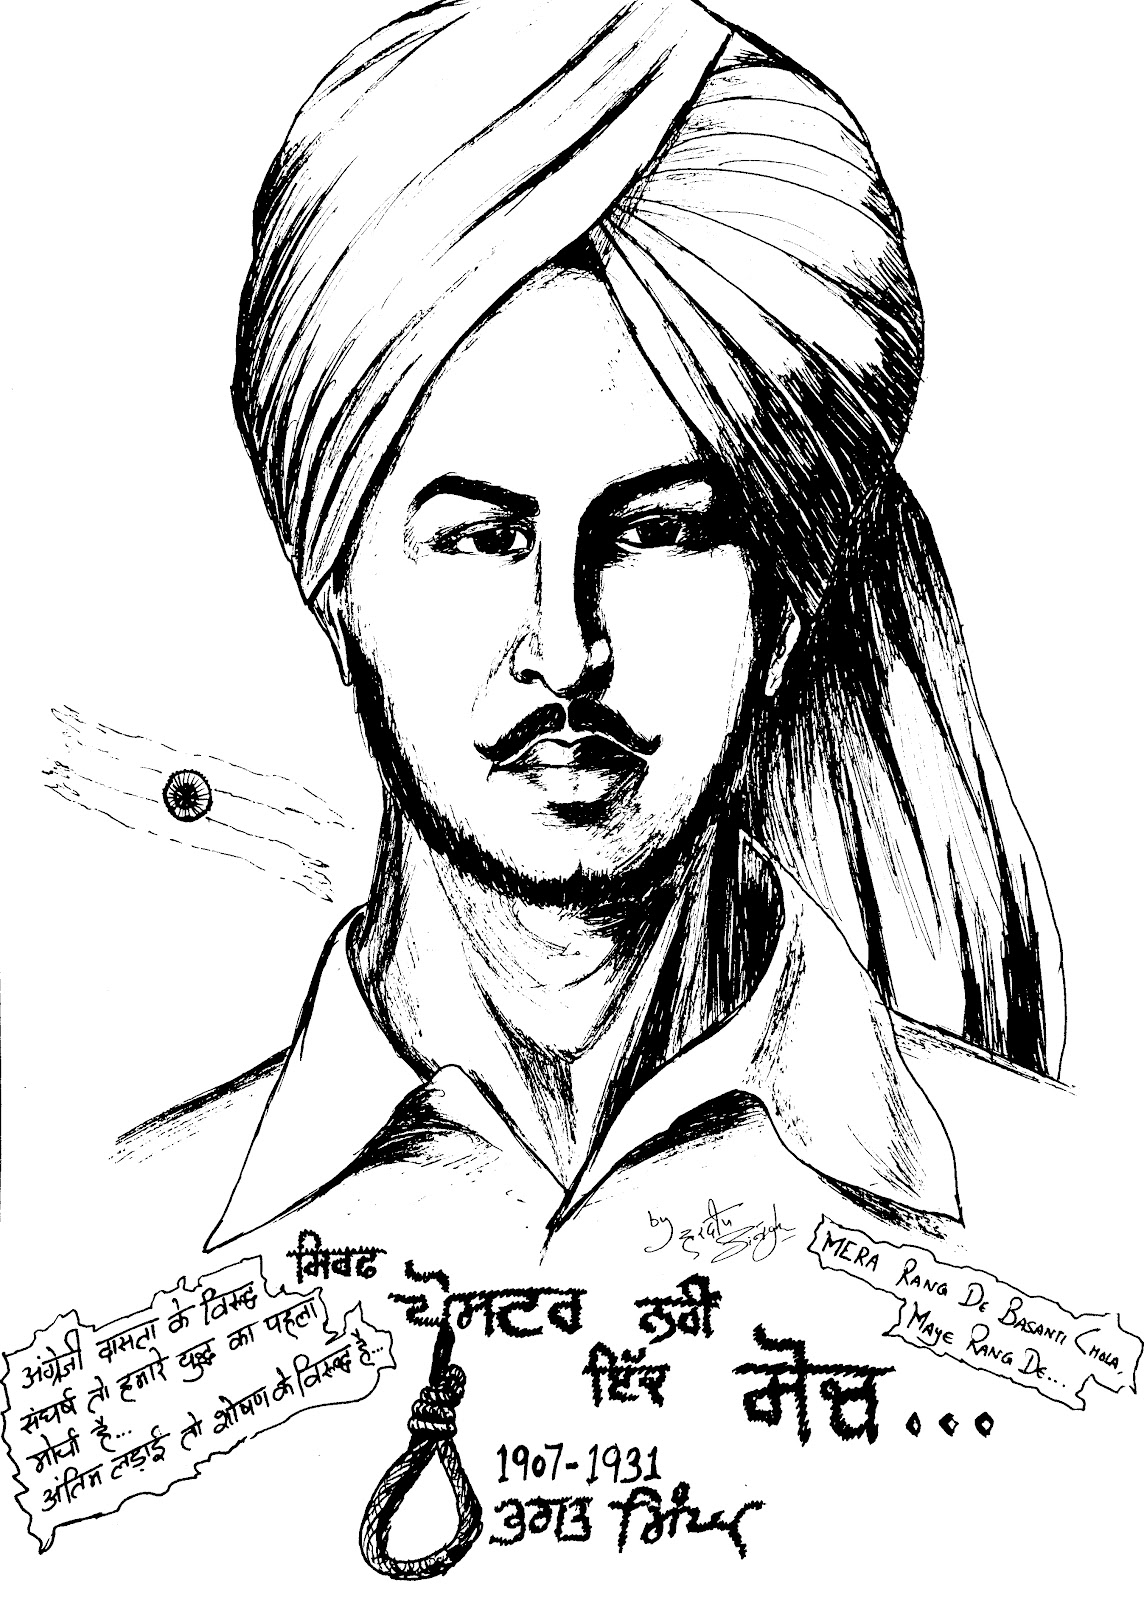 Bhagat Singh Amazing Drawing - Drawing On Indian Freedom Struggle - HD Wallpaper 